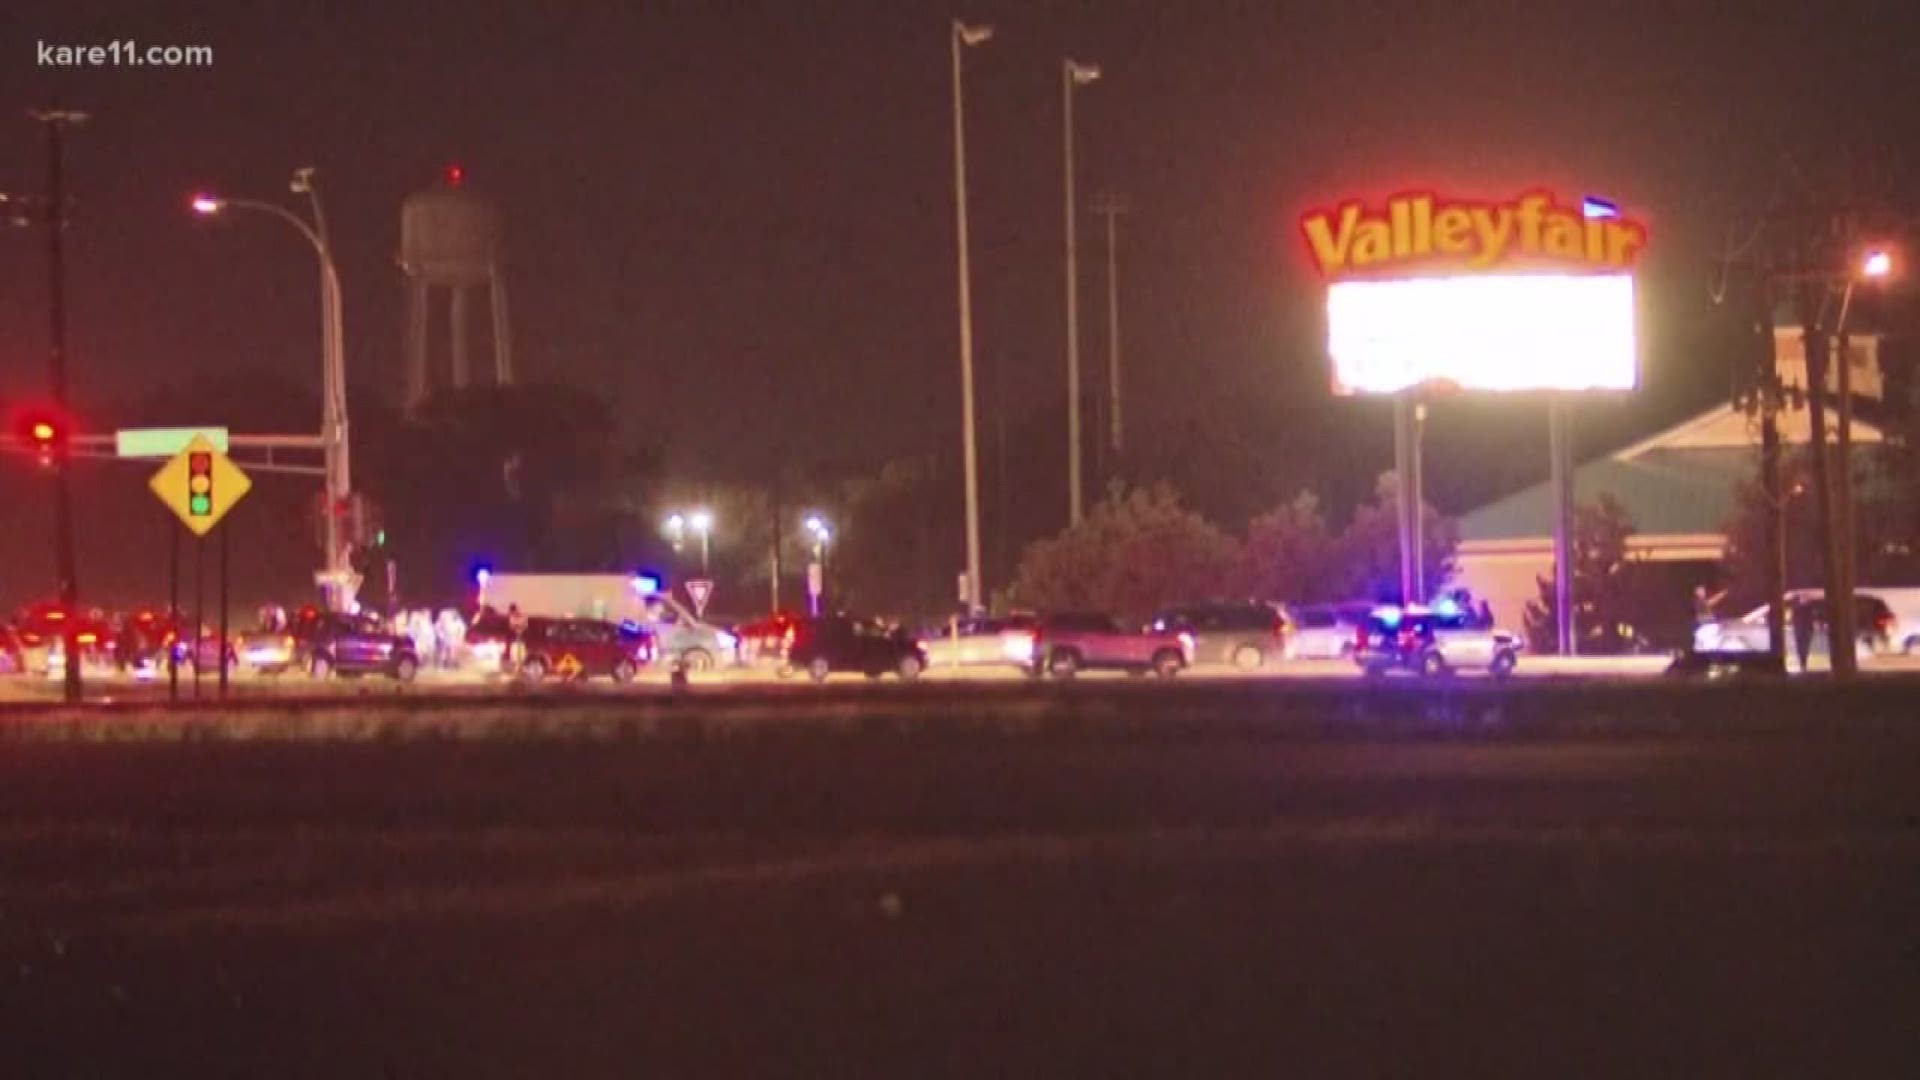 People were in a full-on panic': Valley Fair Mall evacuated after